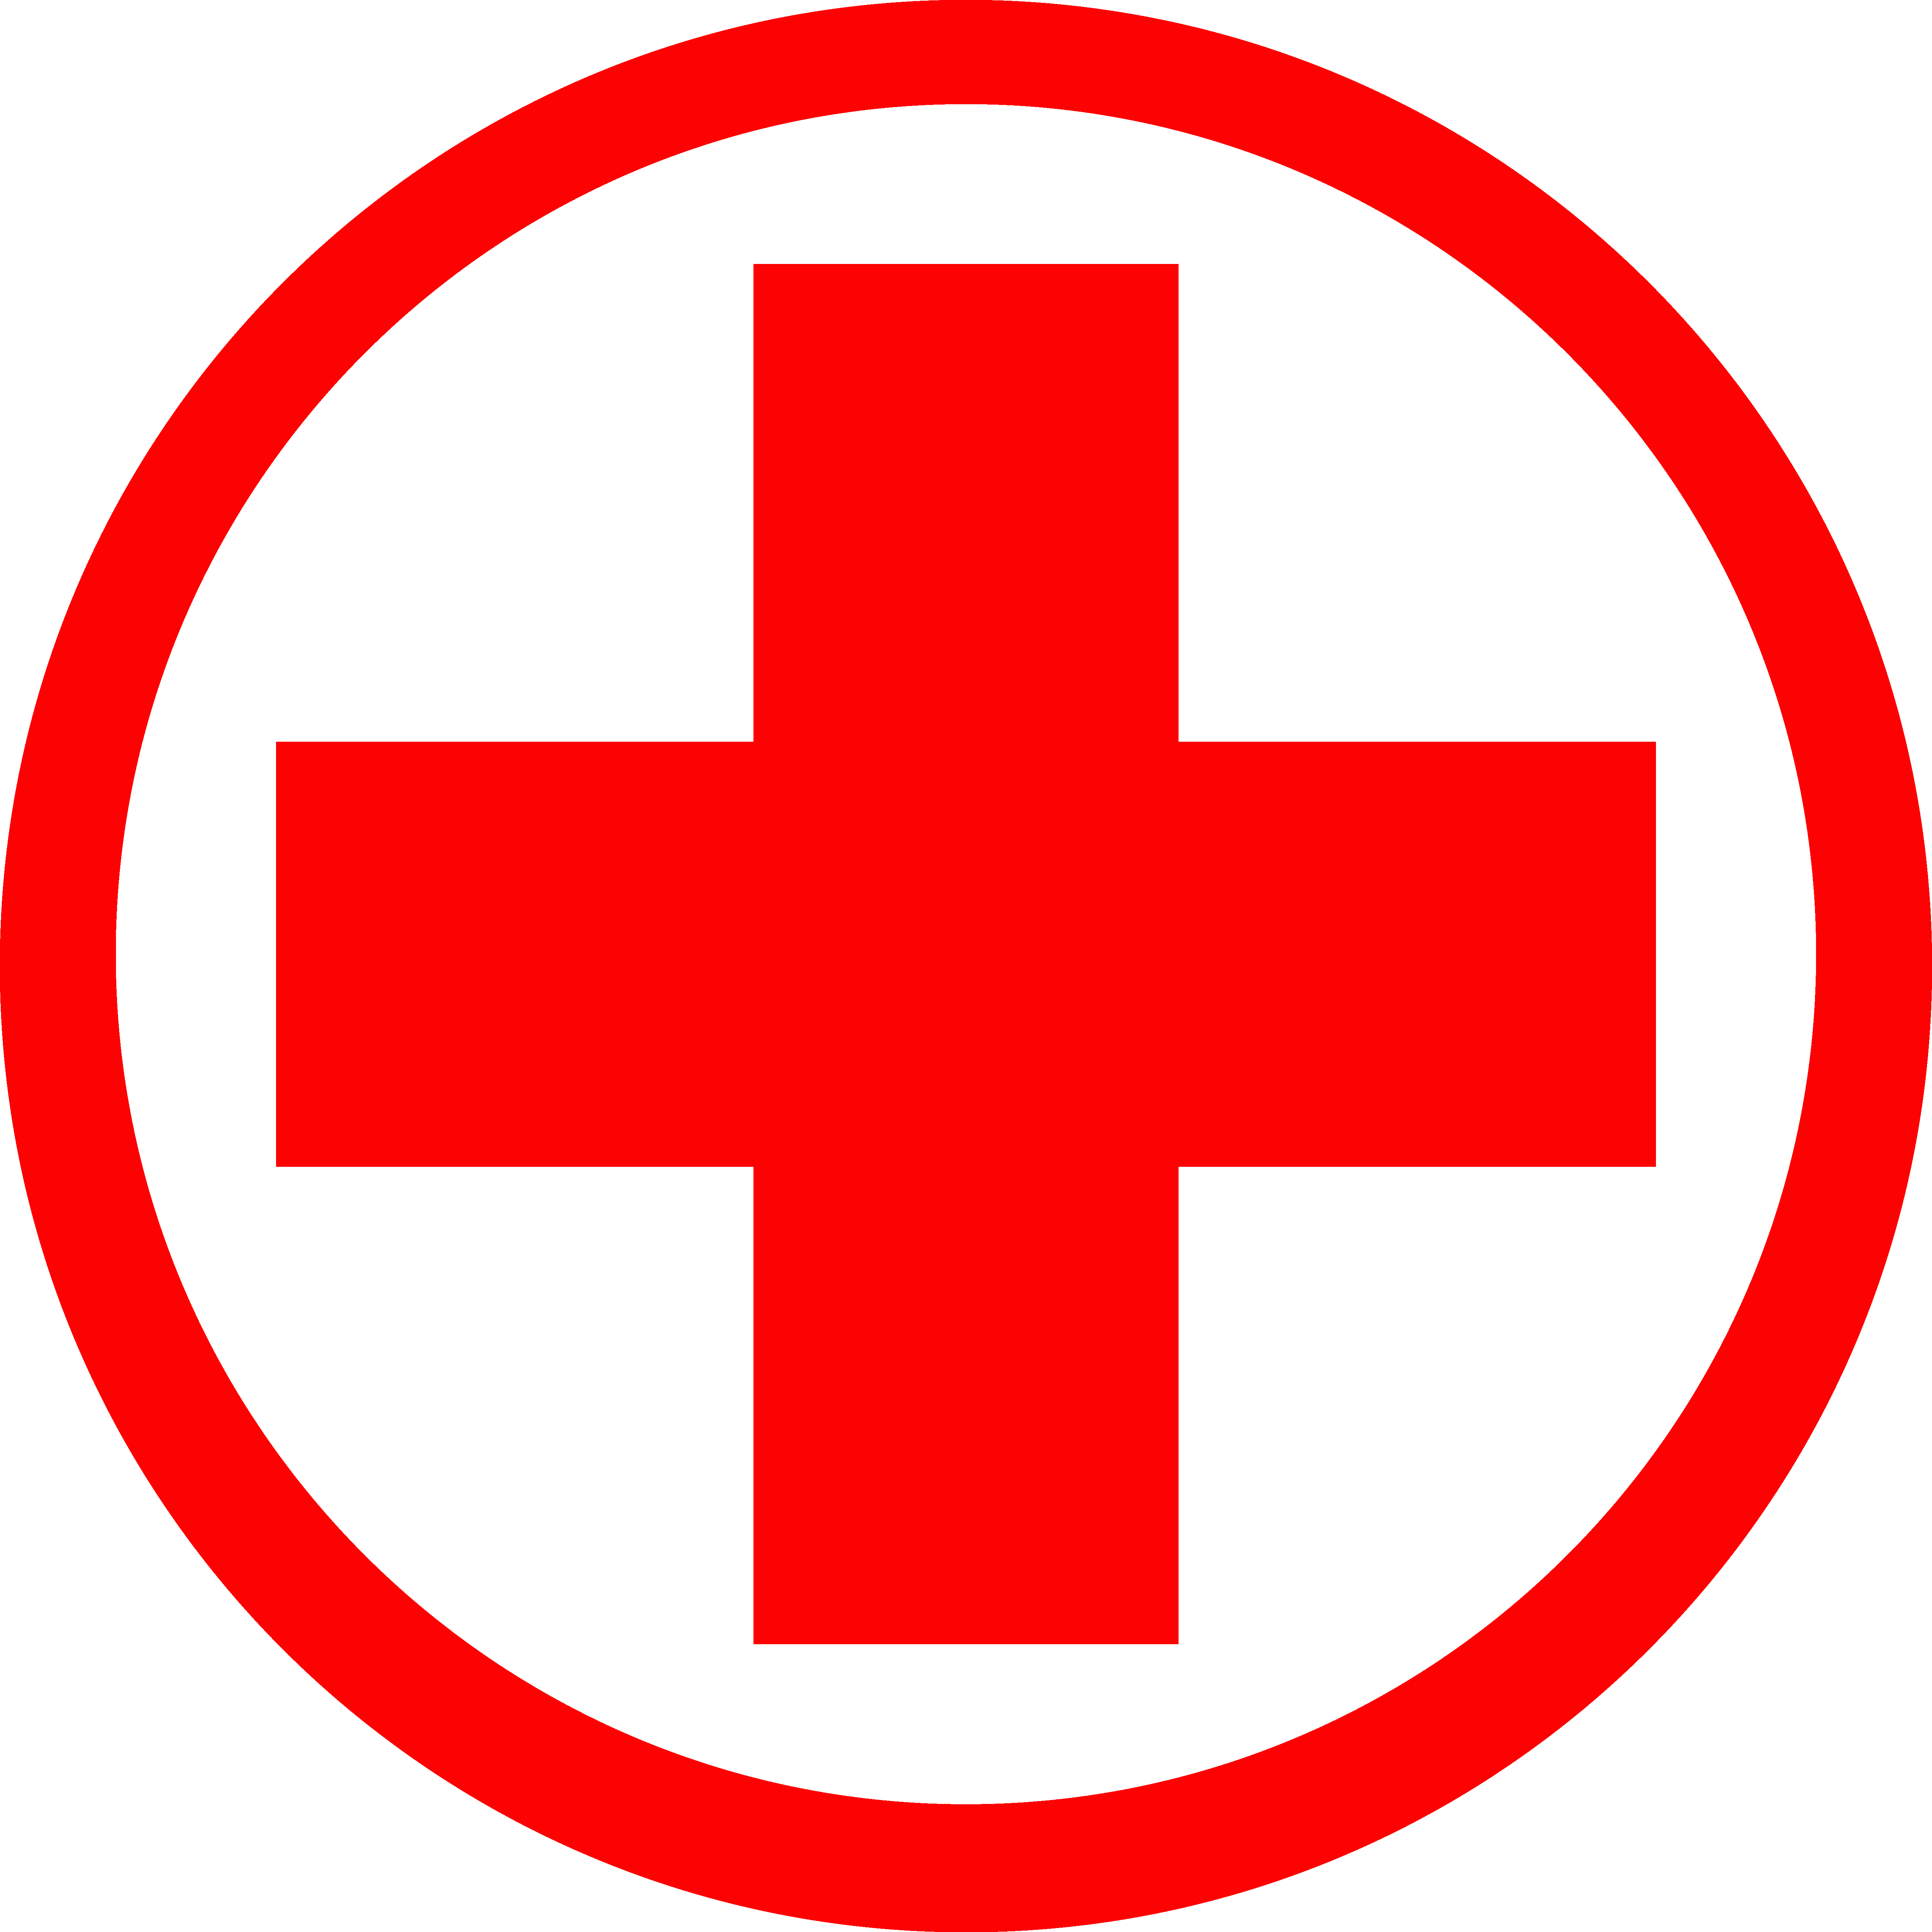 Red Medical Cross Logo - Red medical cross clip art library - RR collections